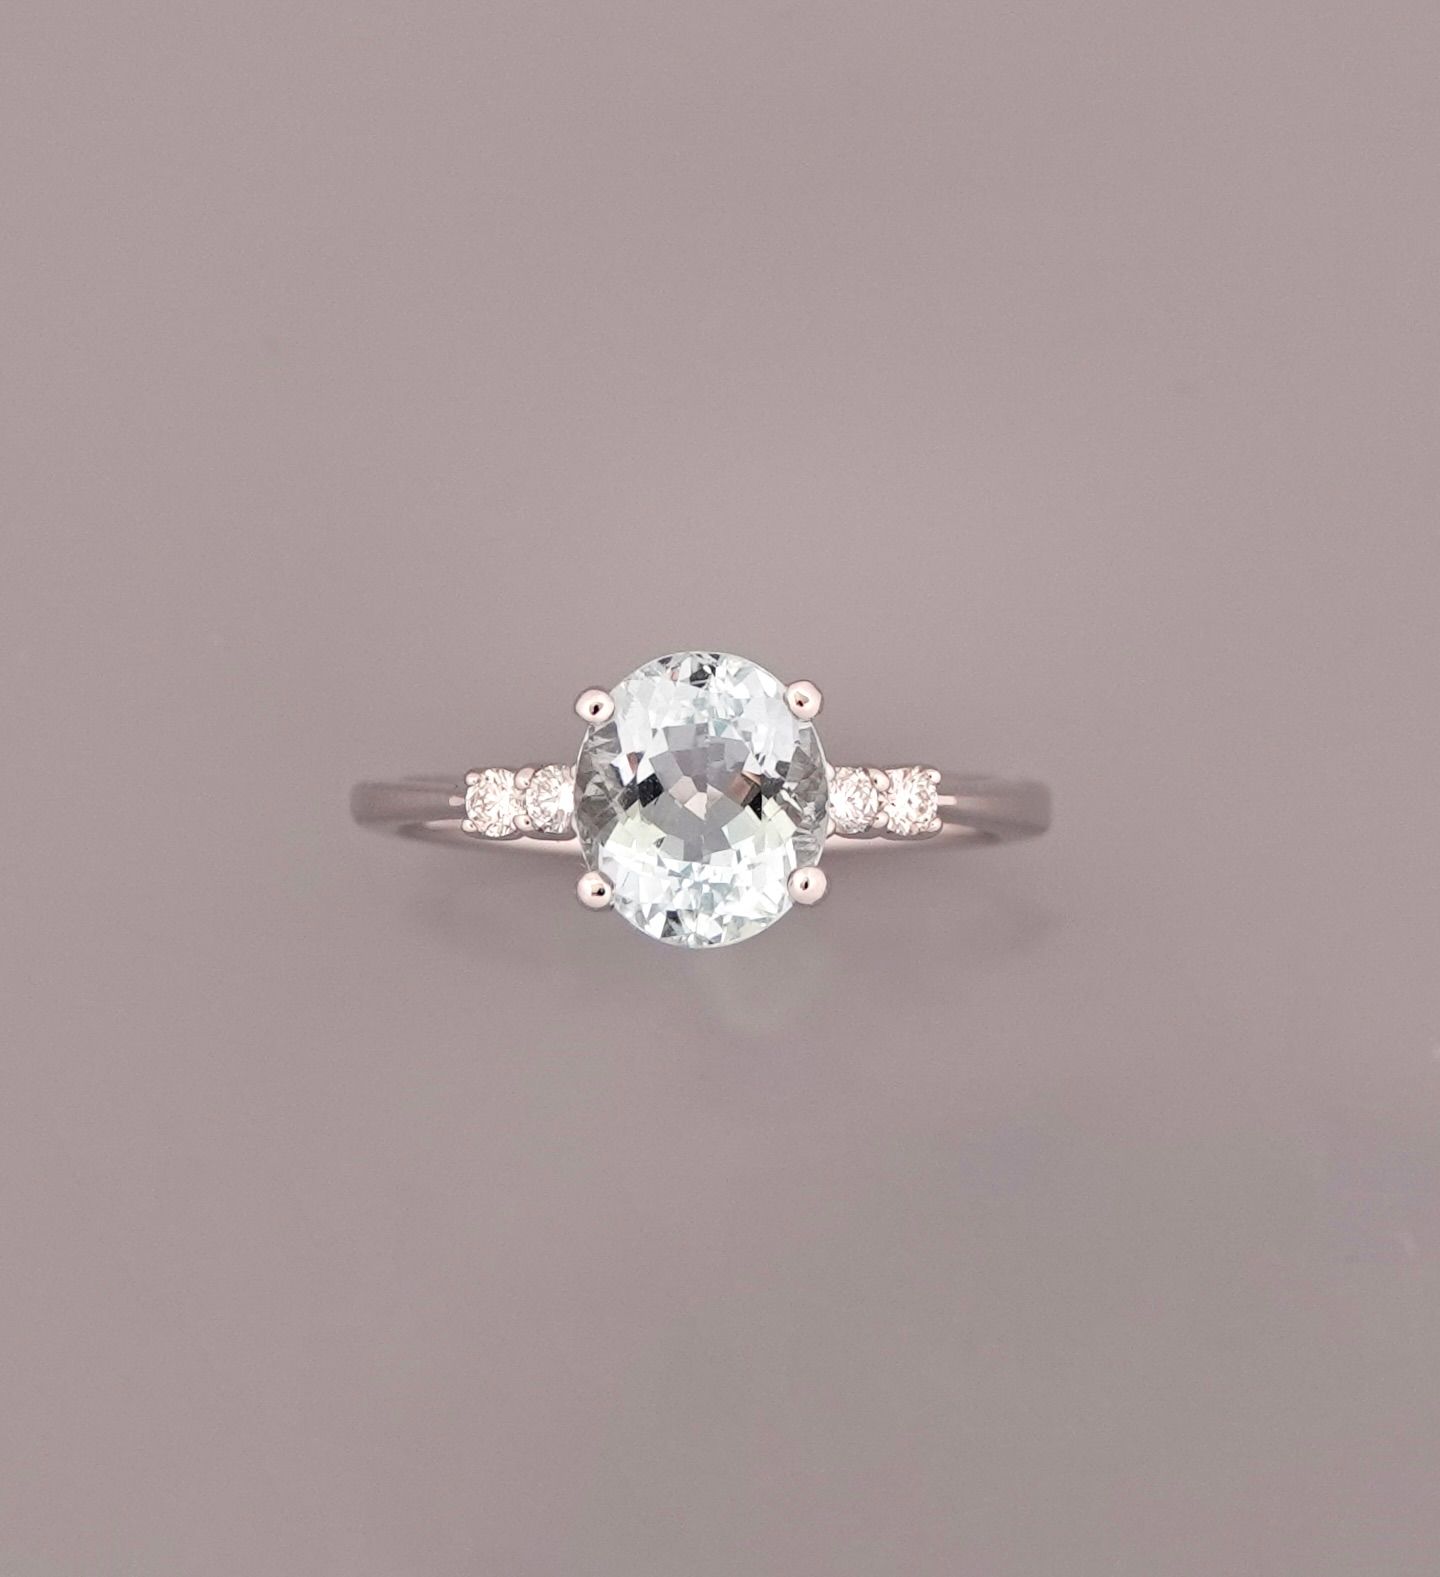 Null Ring in white gold, 750 MM, set with an oval aquamarine weighing 1.66 carat&hellip;